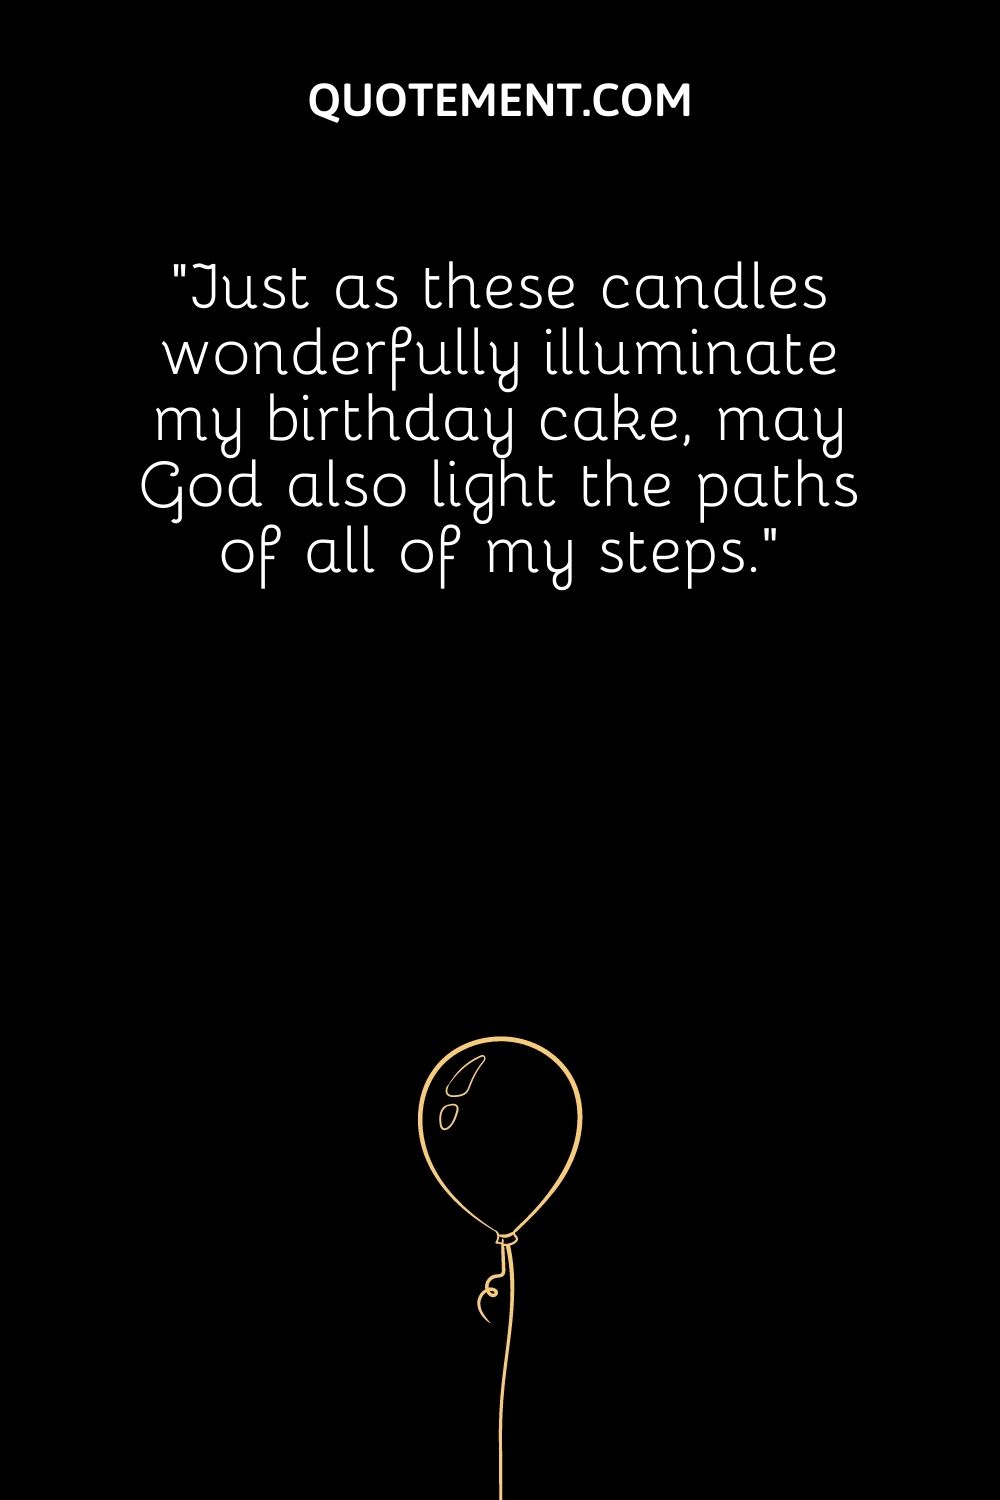 Just as these candles wonderfully illuminate my birthday cake, may God also light the paths of all of my steps